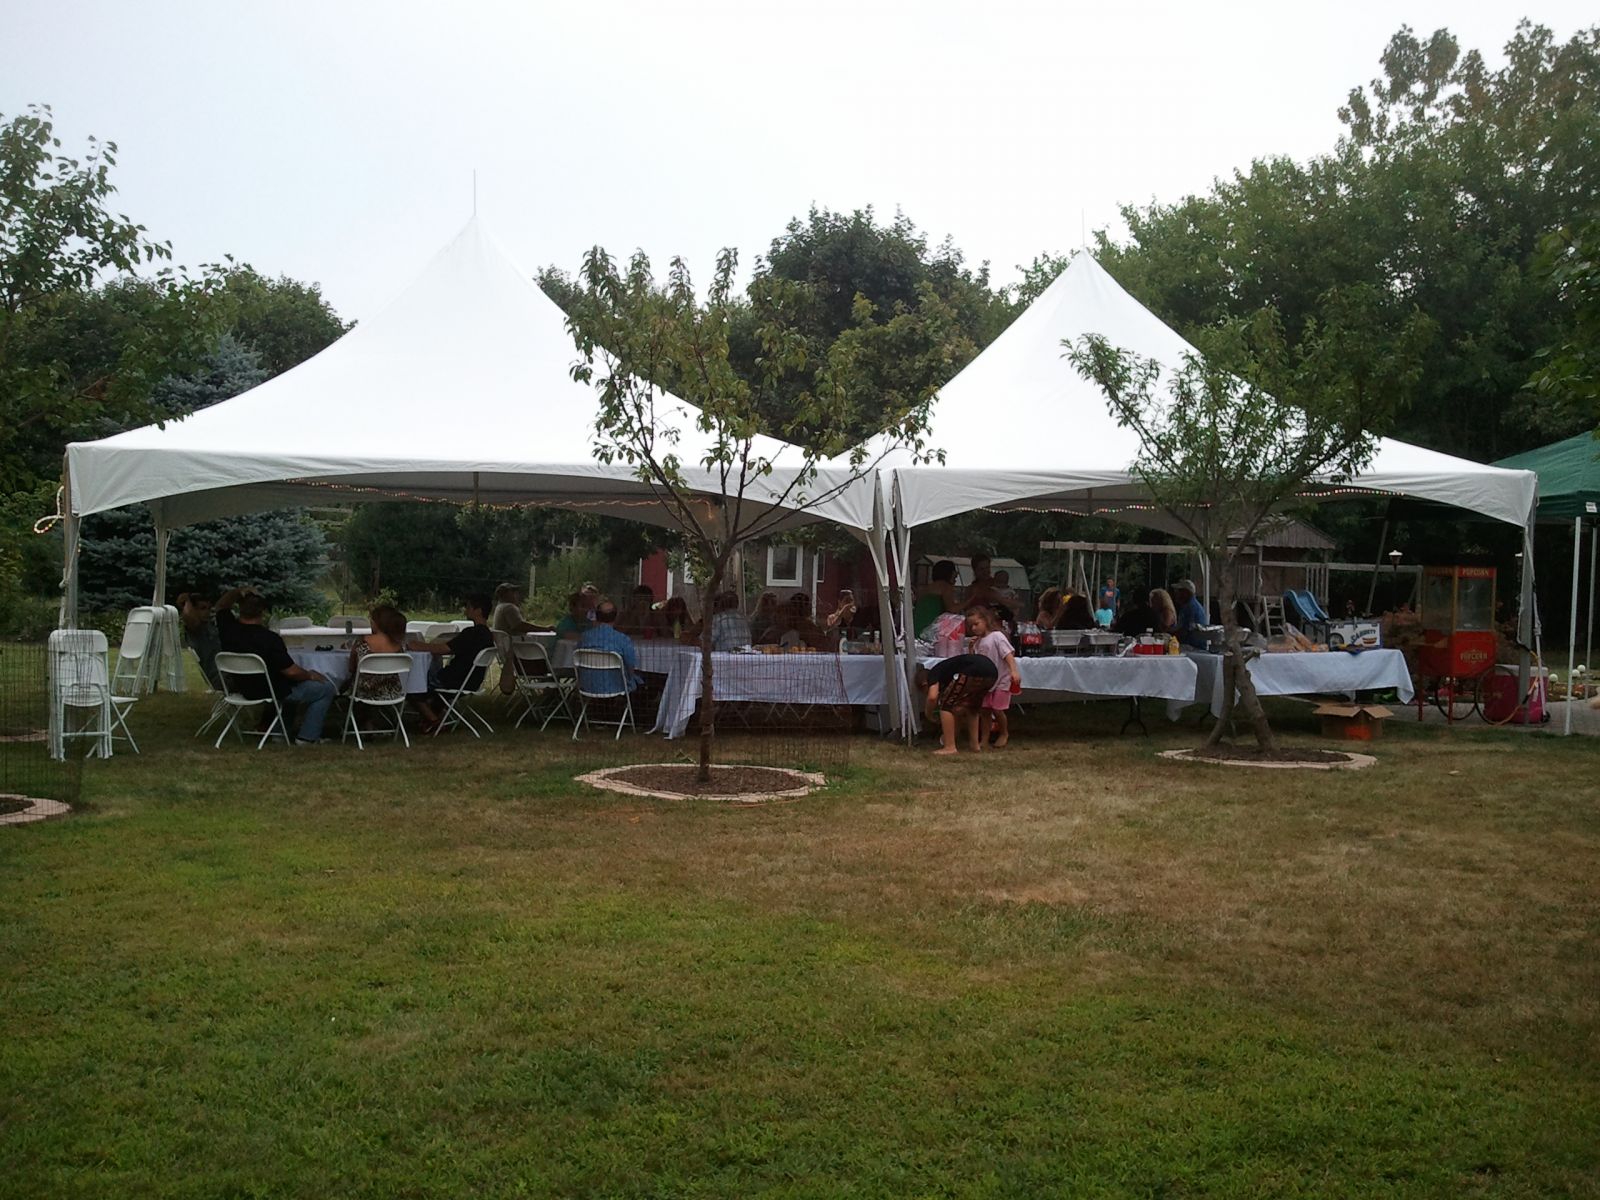 40 foot by 20 foot tent rental for graduation party or other event